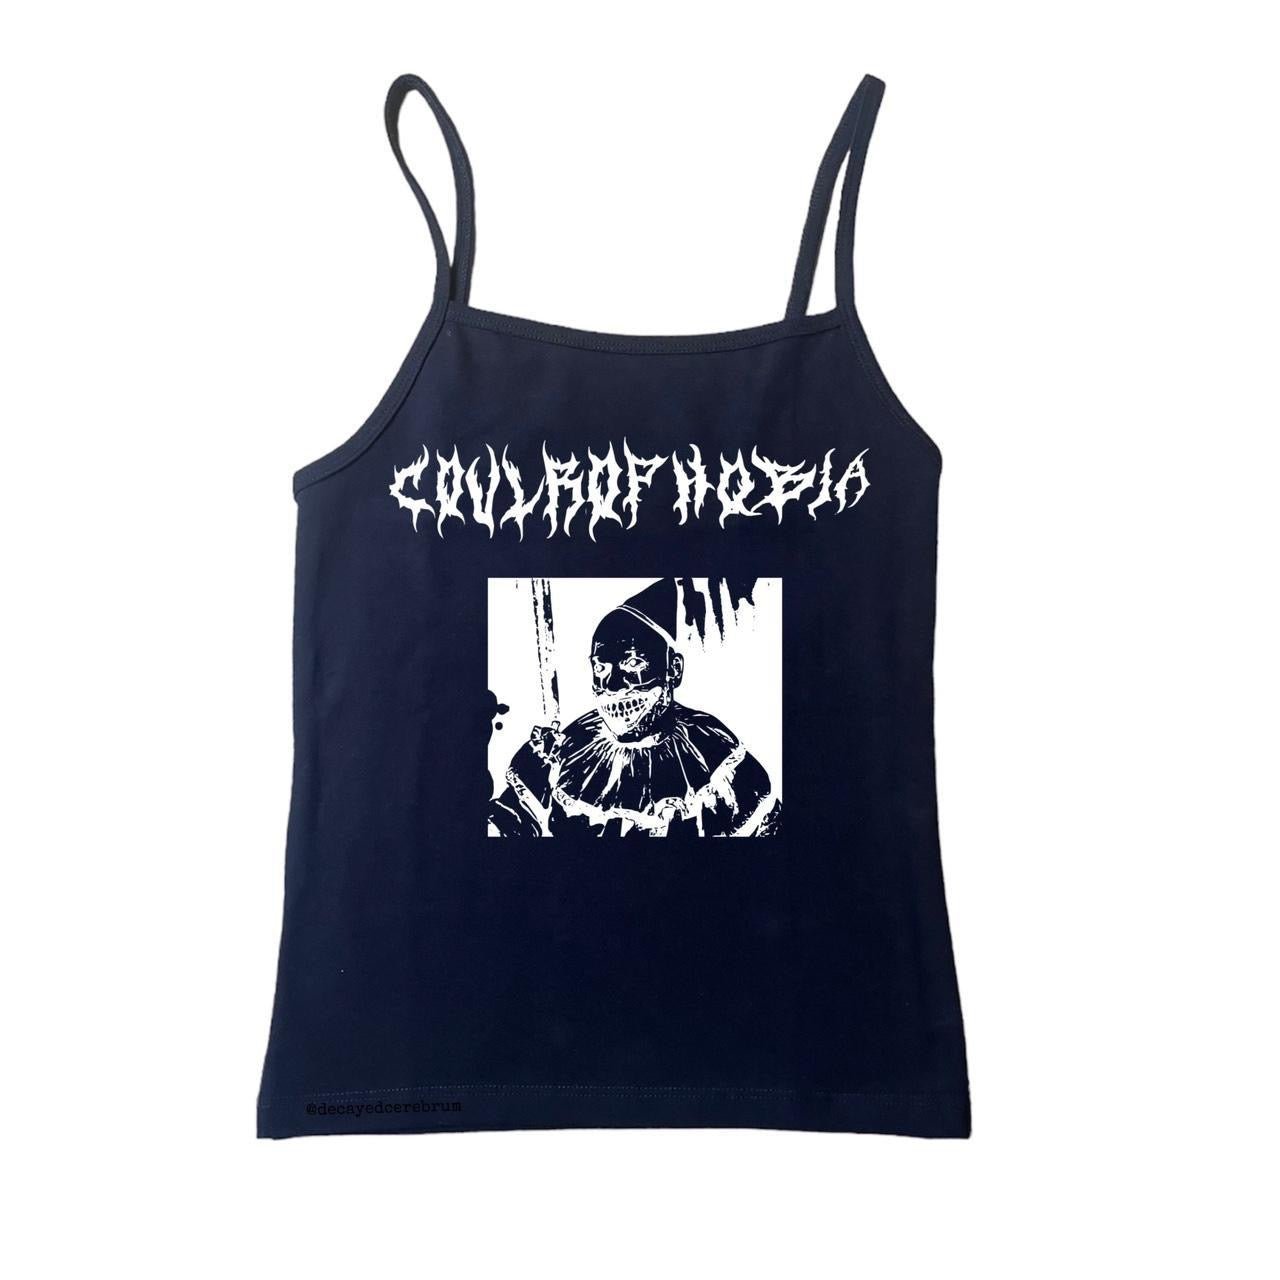 Coulrophobia tank top